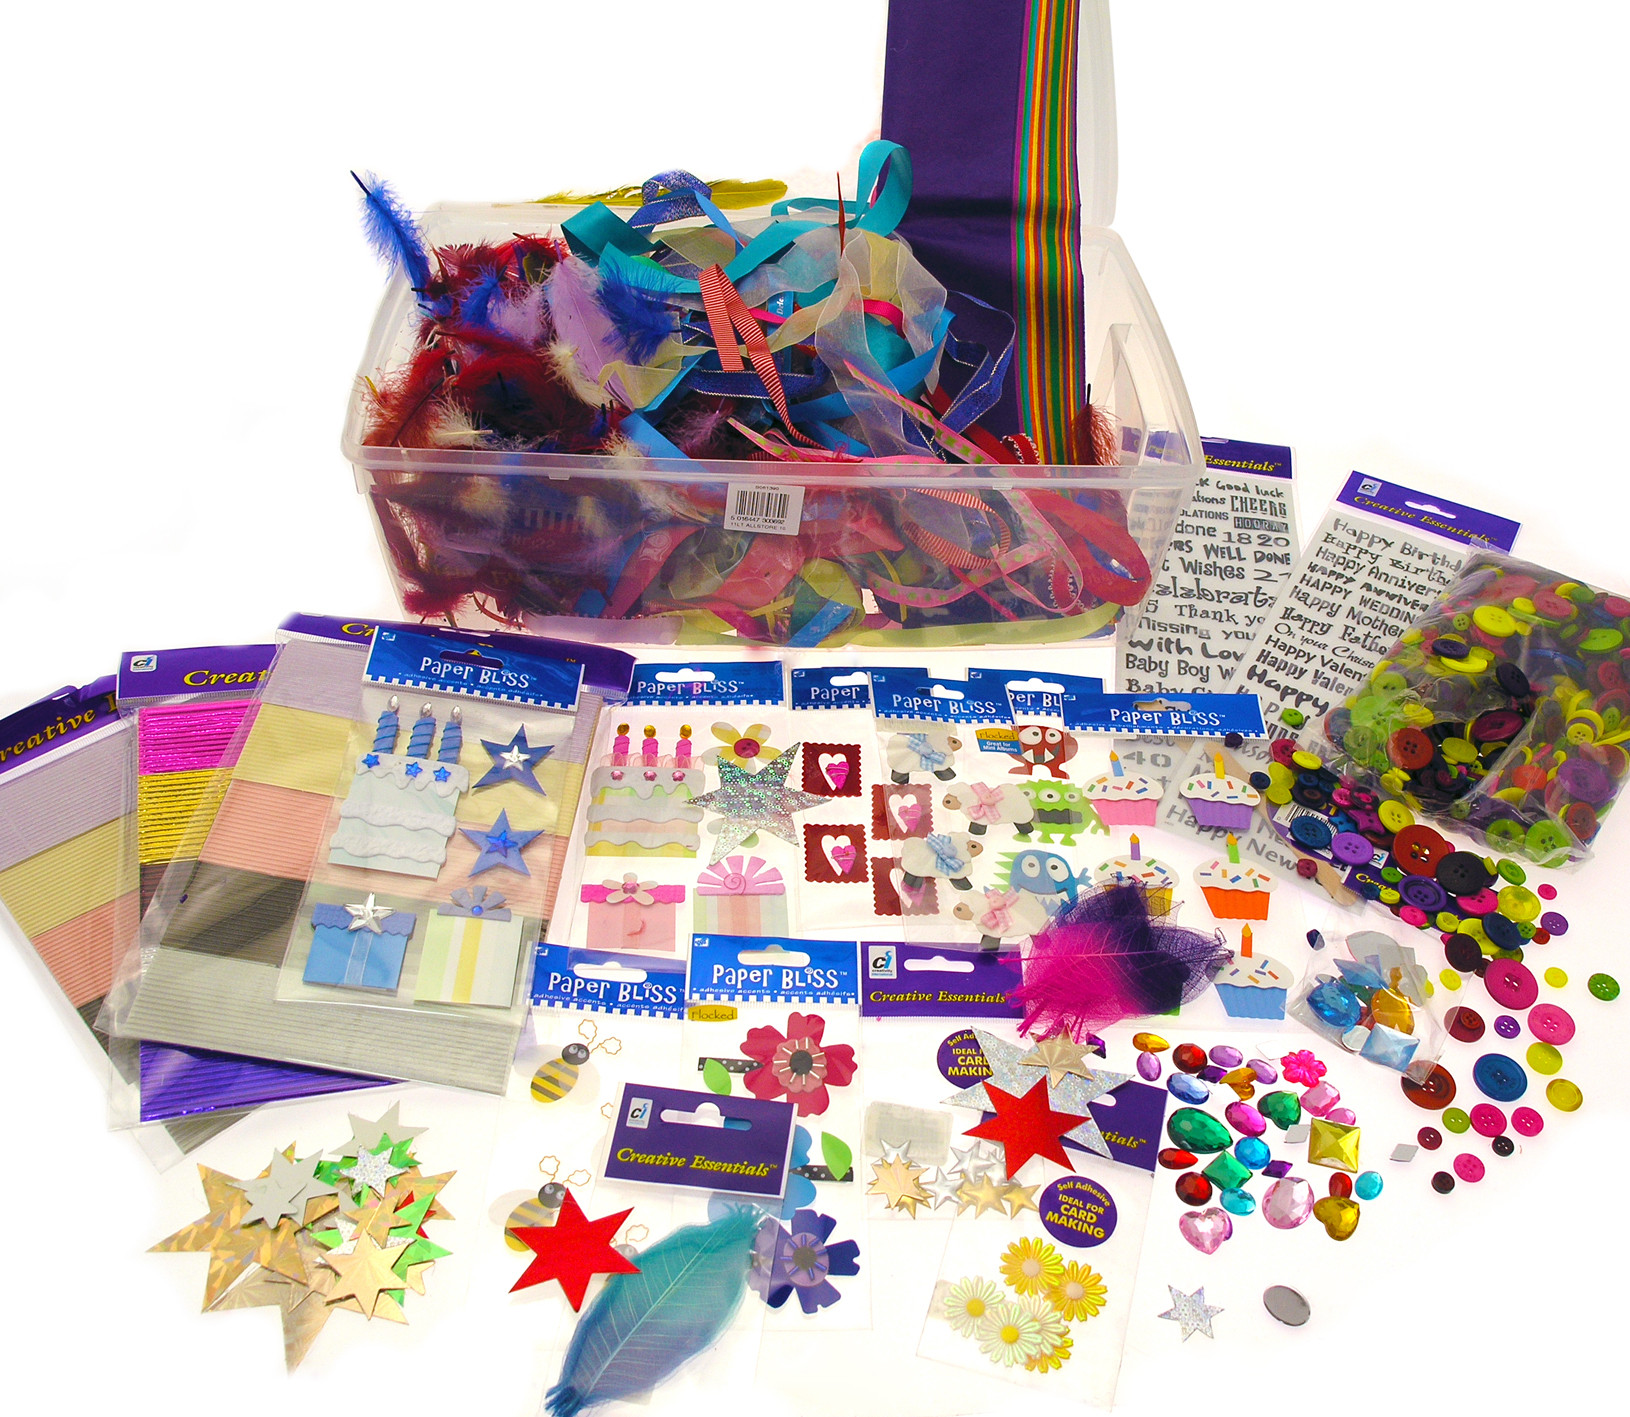 Christmas Craft Kit For Kids
 Bumper craft kits ideal for a crafty kids party